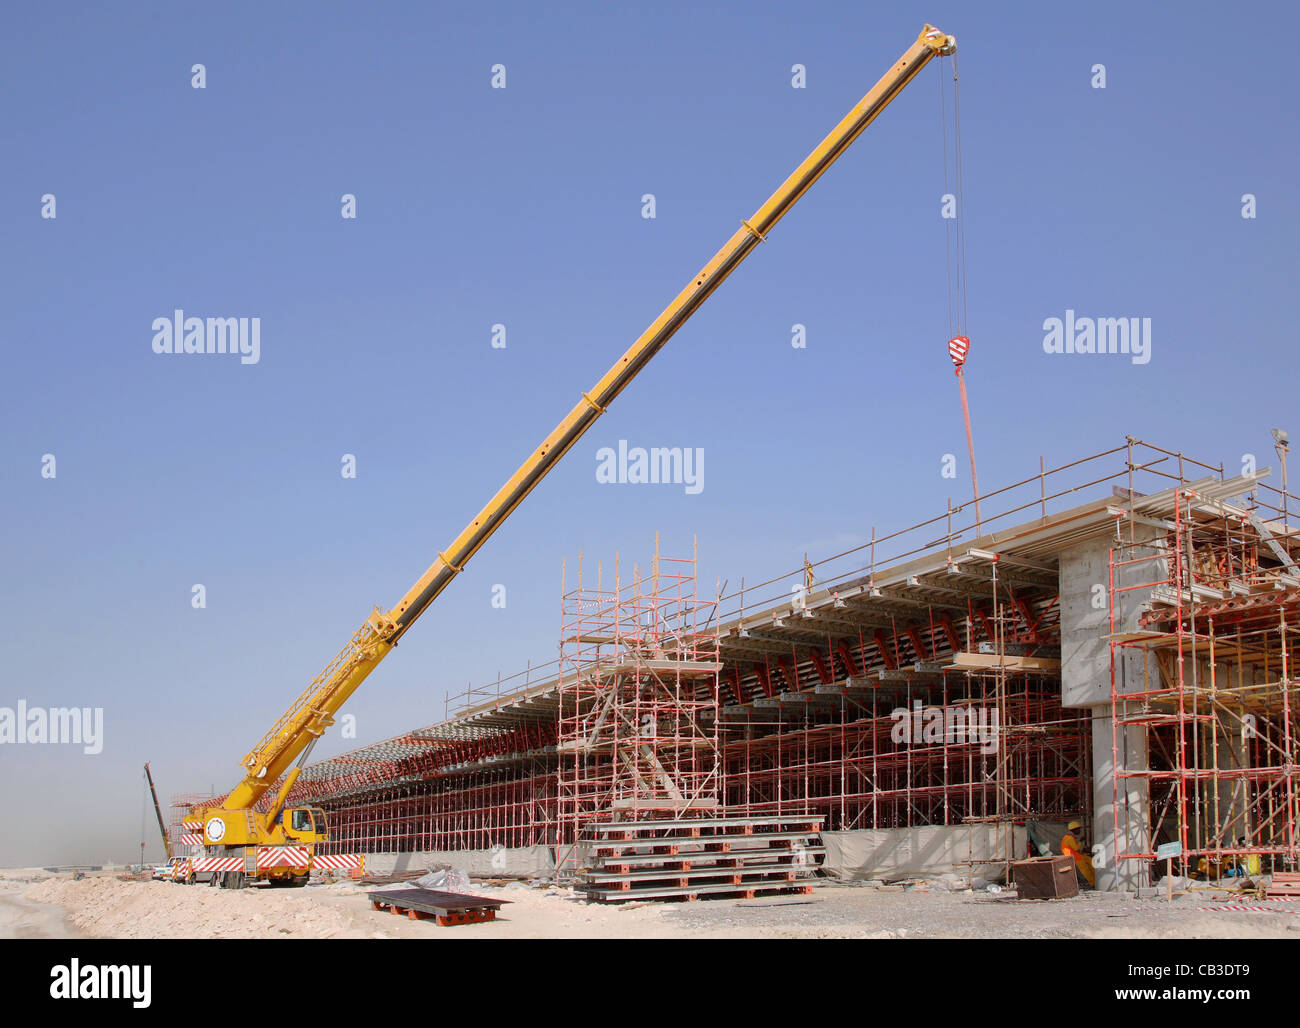 A mobile crane operates on a road construction site in Dubai. Part of the new Parallel Road Scheme Stock Photo